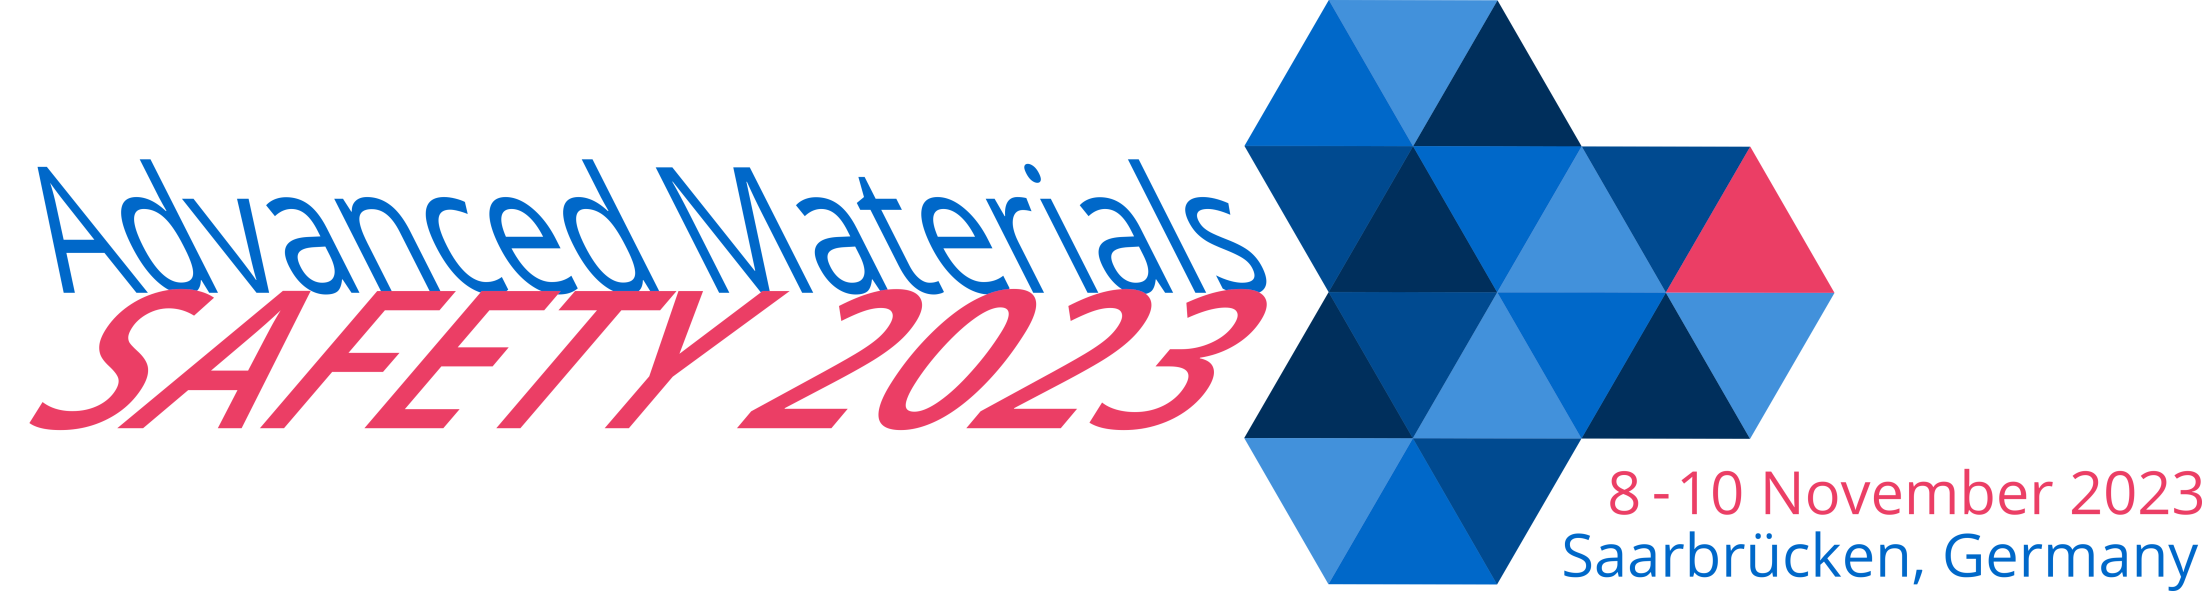 Conference »Advanced Materials Safety 2023« – Abstract submission is now open!